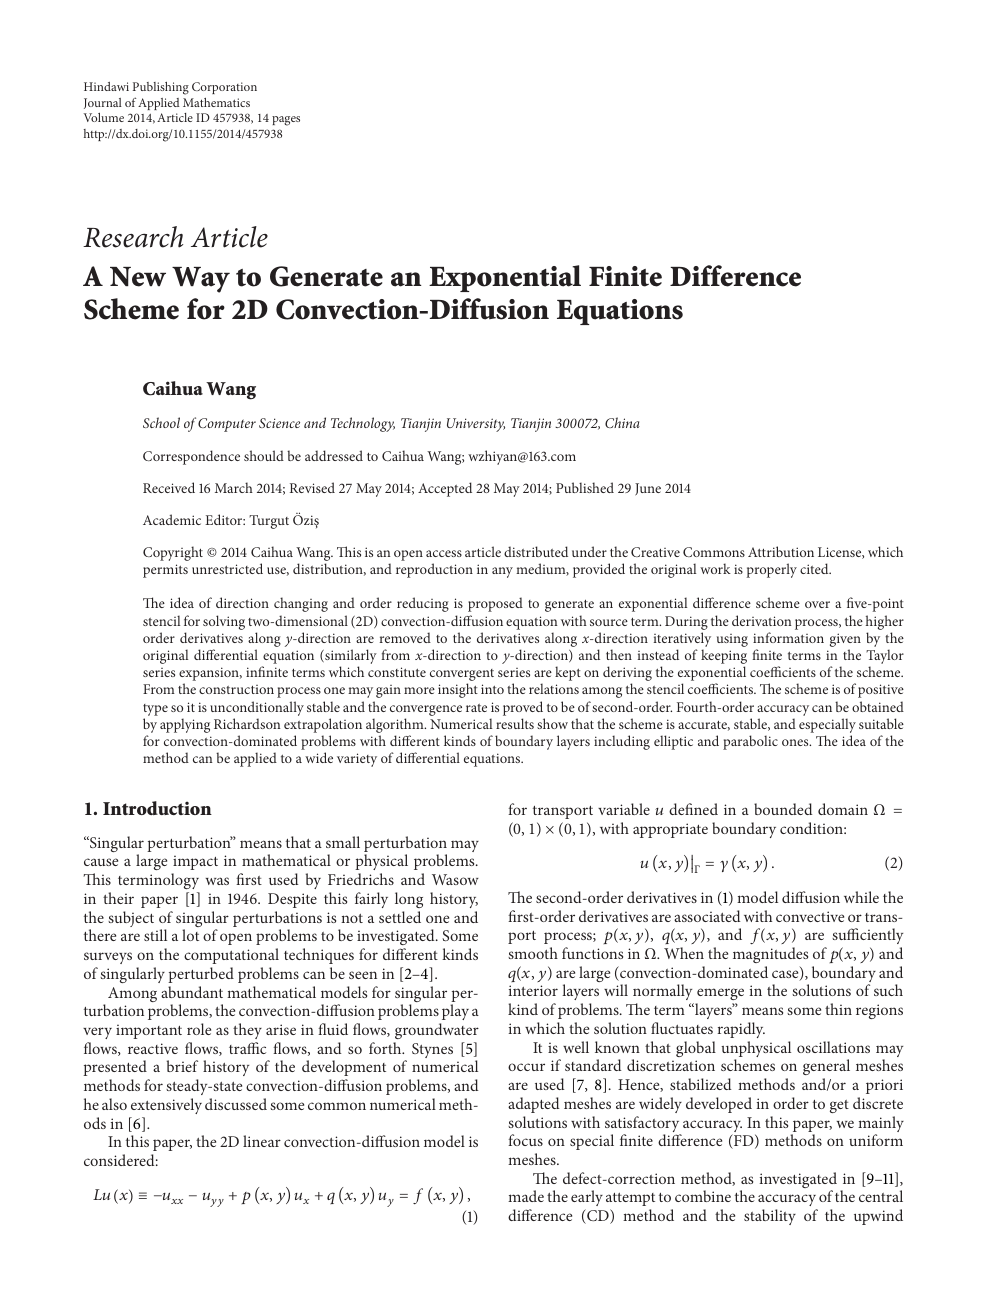 A New Way To Generate An Exponential Finite Difference Scheme For 2d Convection Diffusion Equations Topic Of Research Paper In Mathematics Download Scholarly Article Pdf And Read For Free On Cyberleninka Open